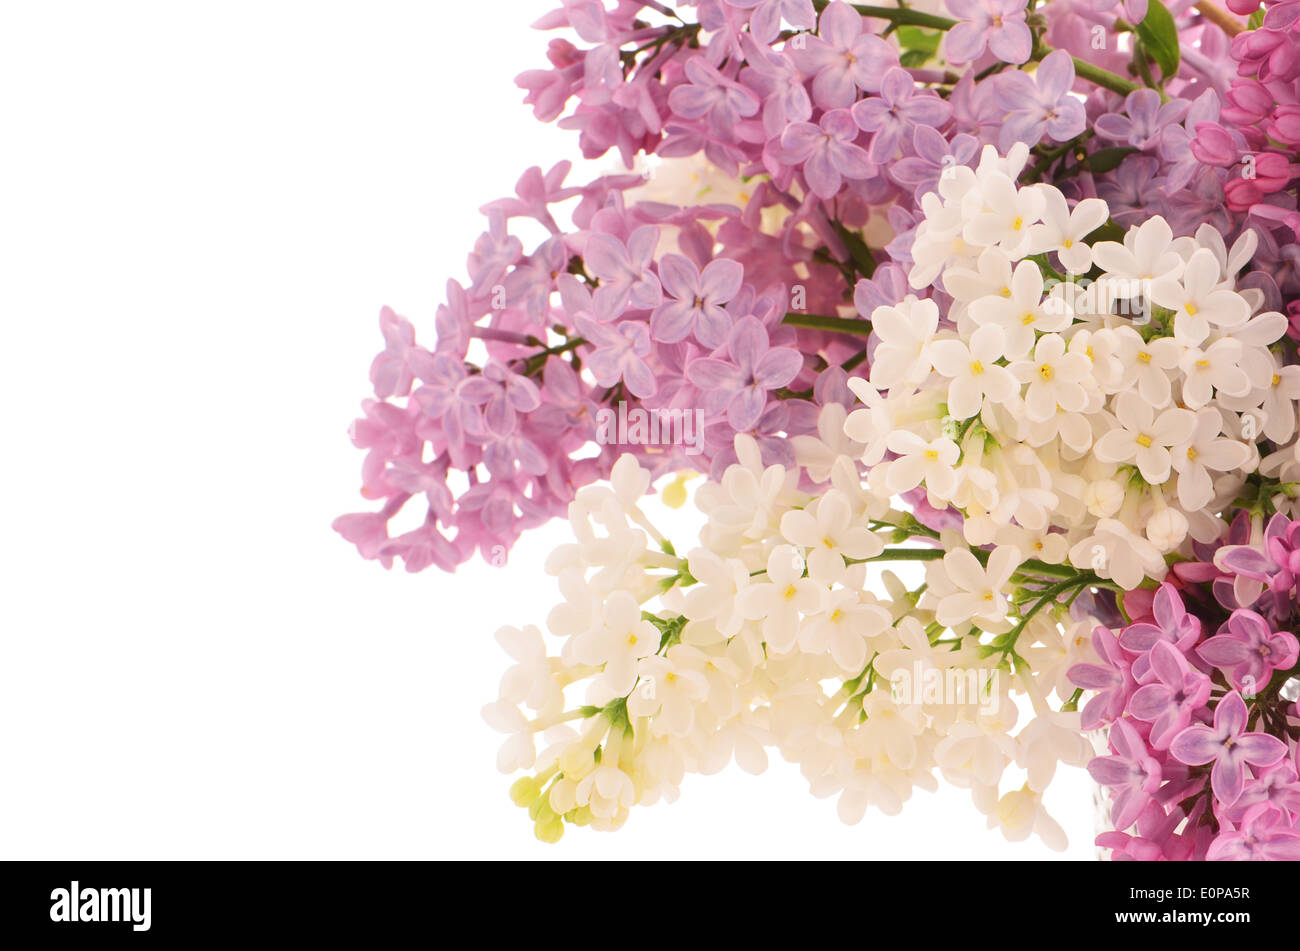 Purple and white lilacs in horizontal format isolated on white background with room for text Stock Photo